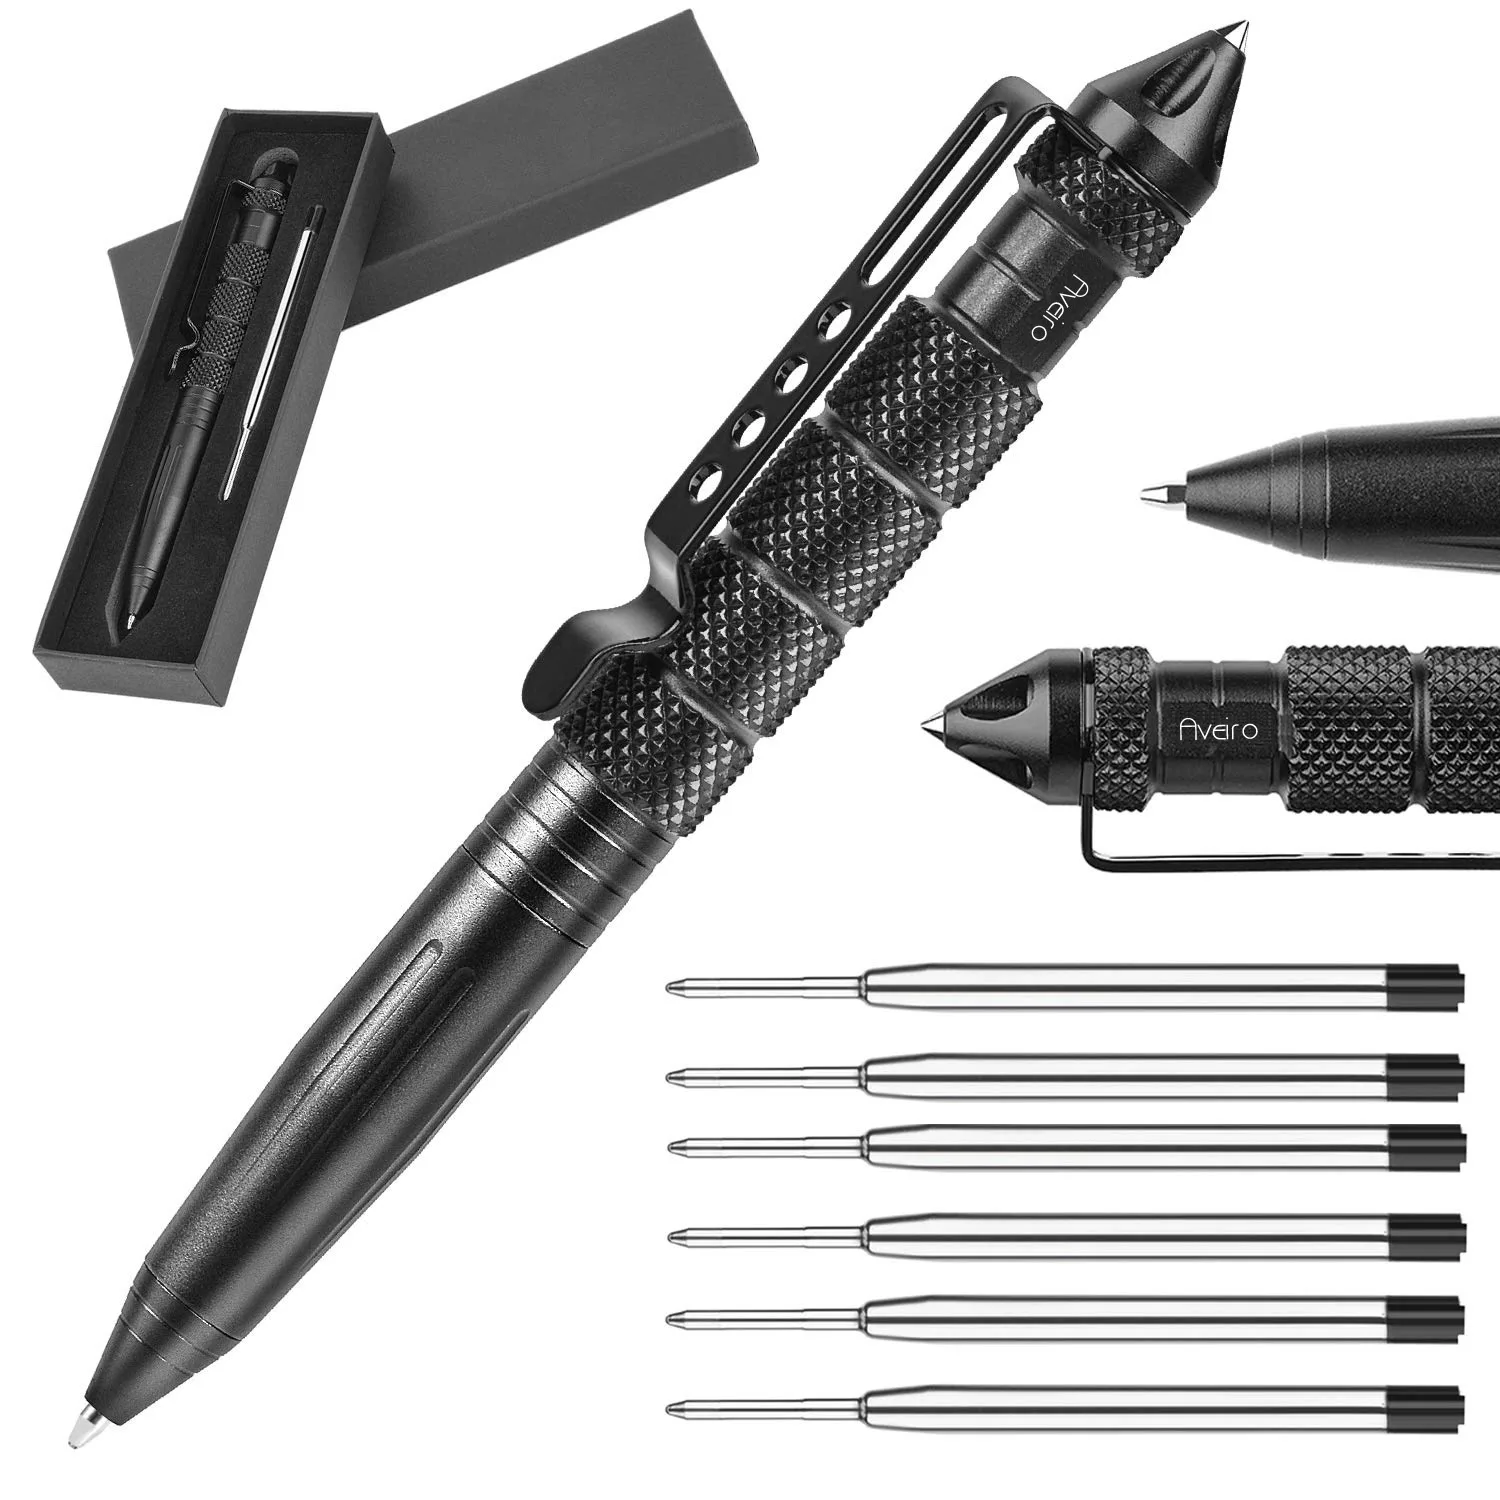 

Military Tactical Pen, Professional Self Defense Pen, Emergency Glass Breaker Pen - Tungsten Steel, Writing Tool with 6 Refill